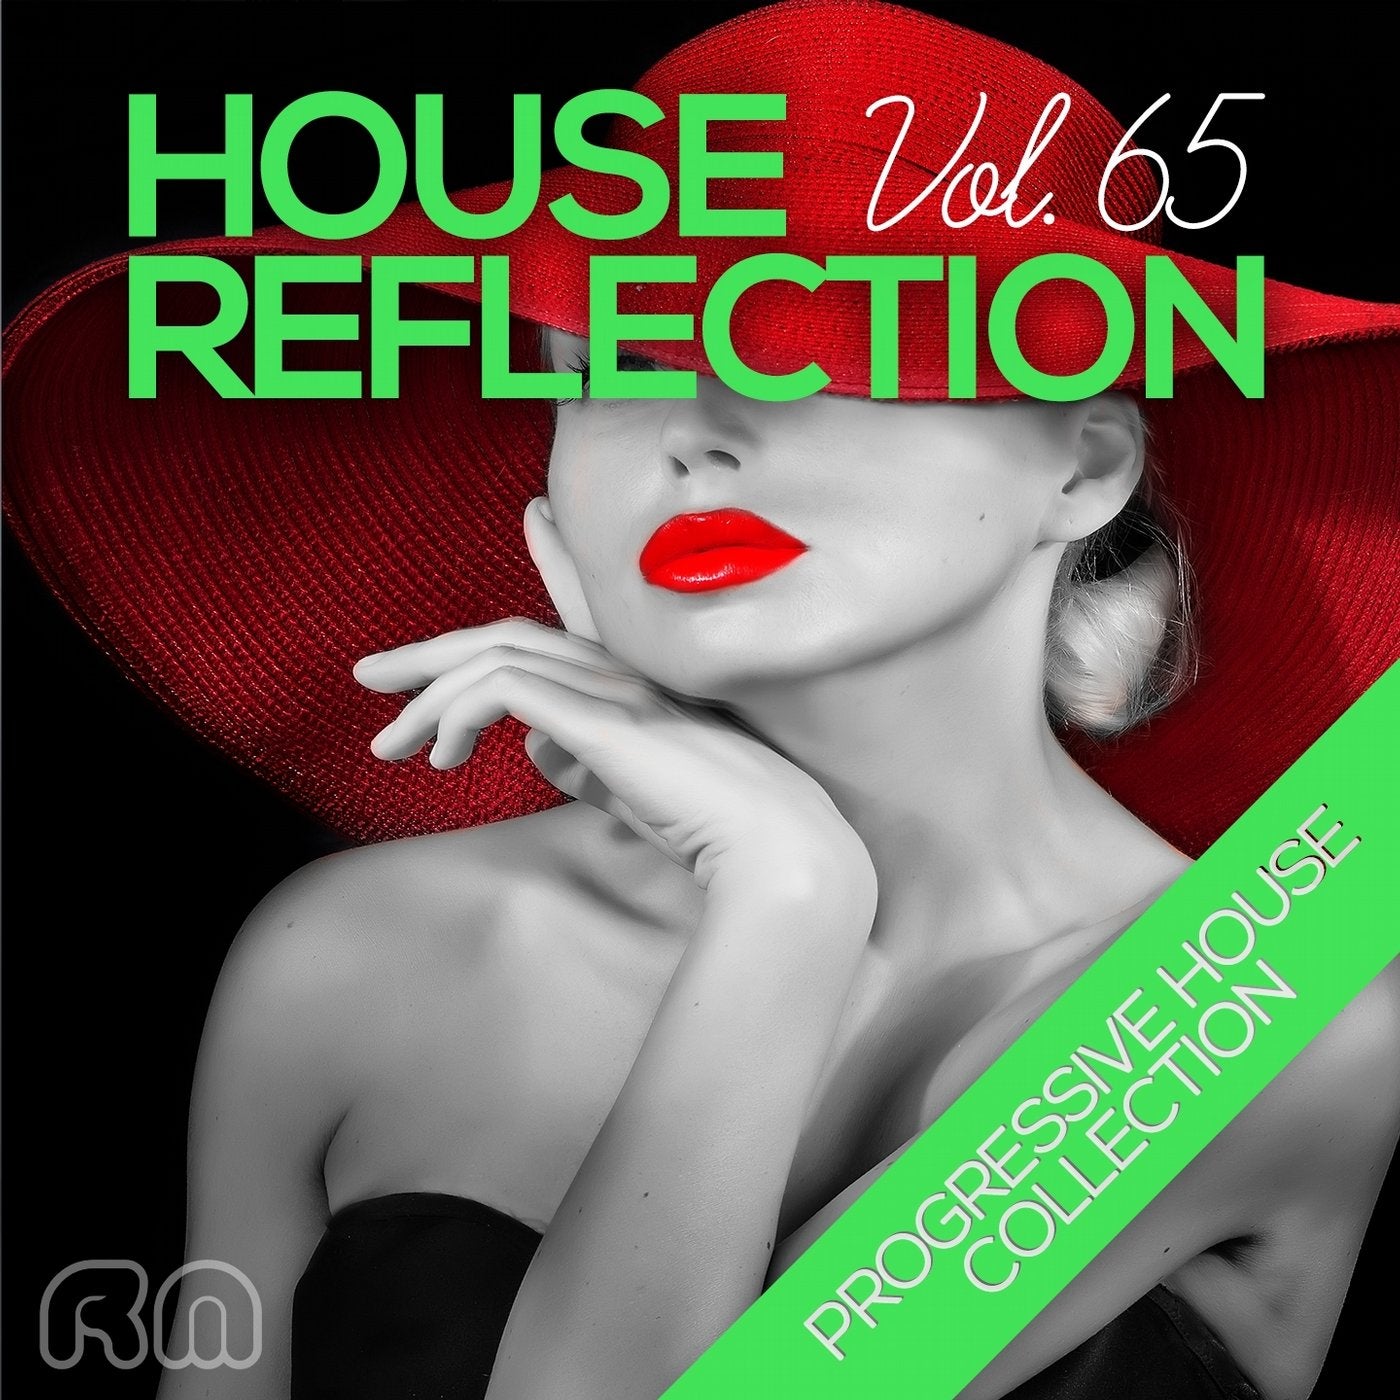 House Reflection - Progressive House Collection, Vol. 65